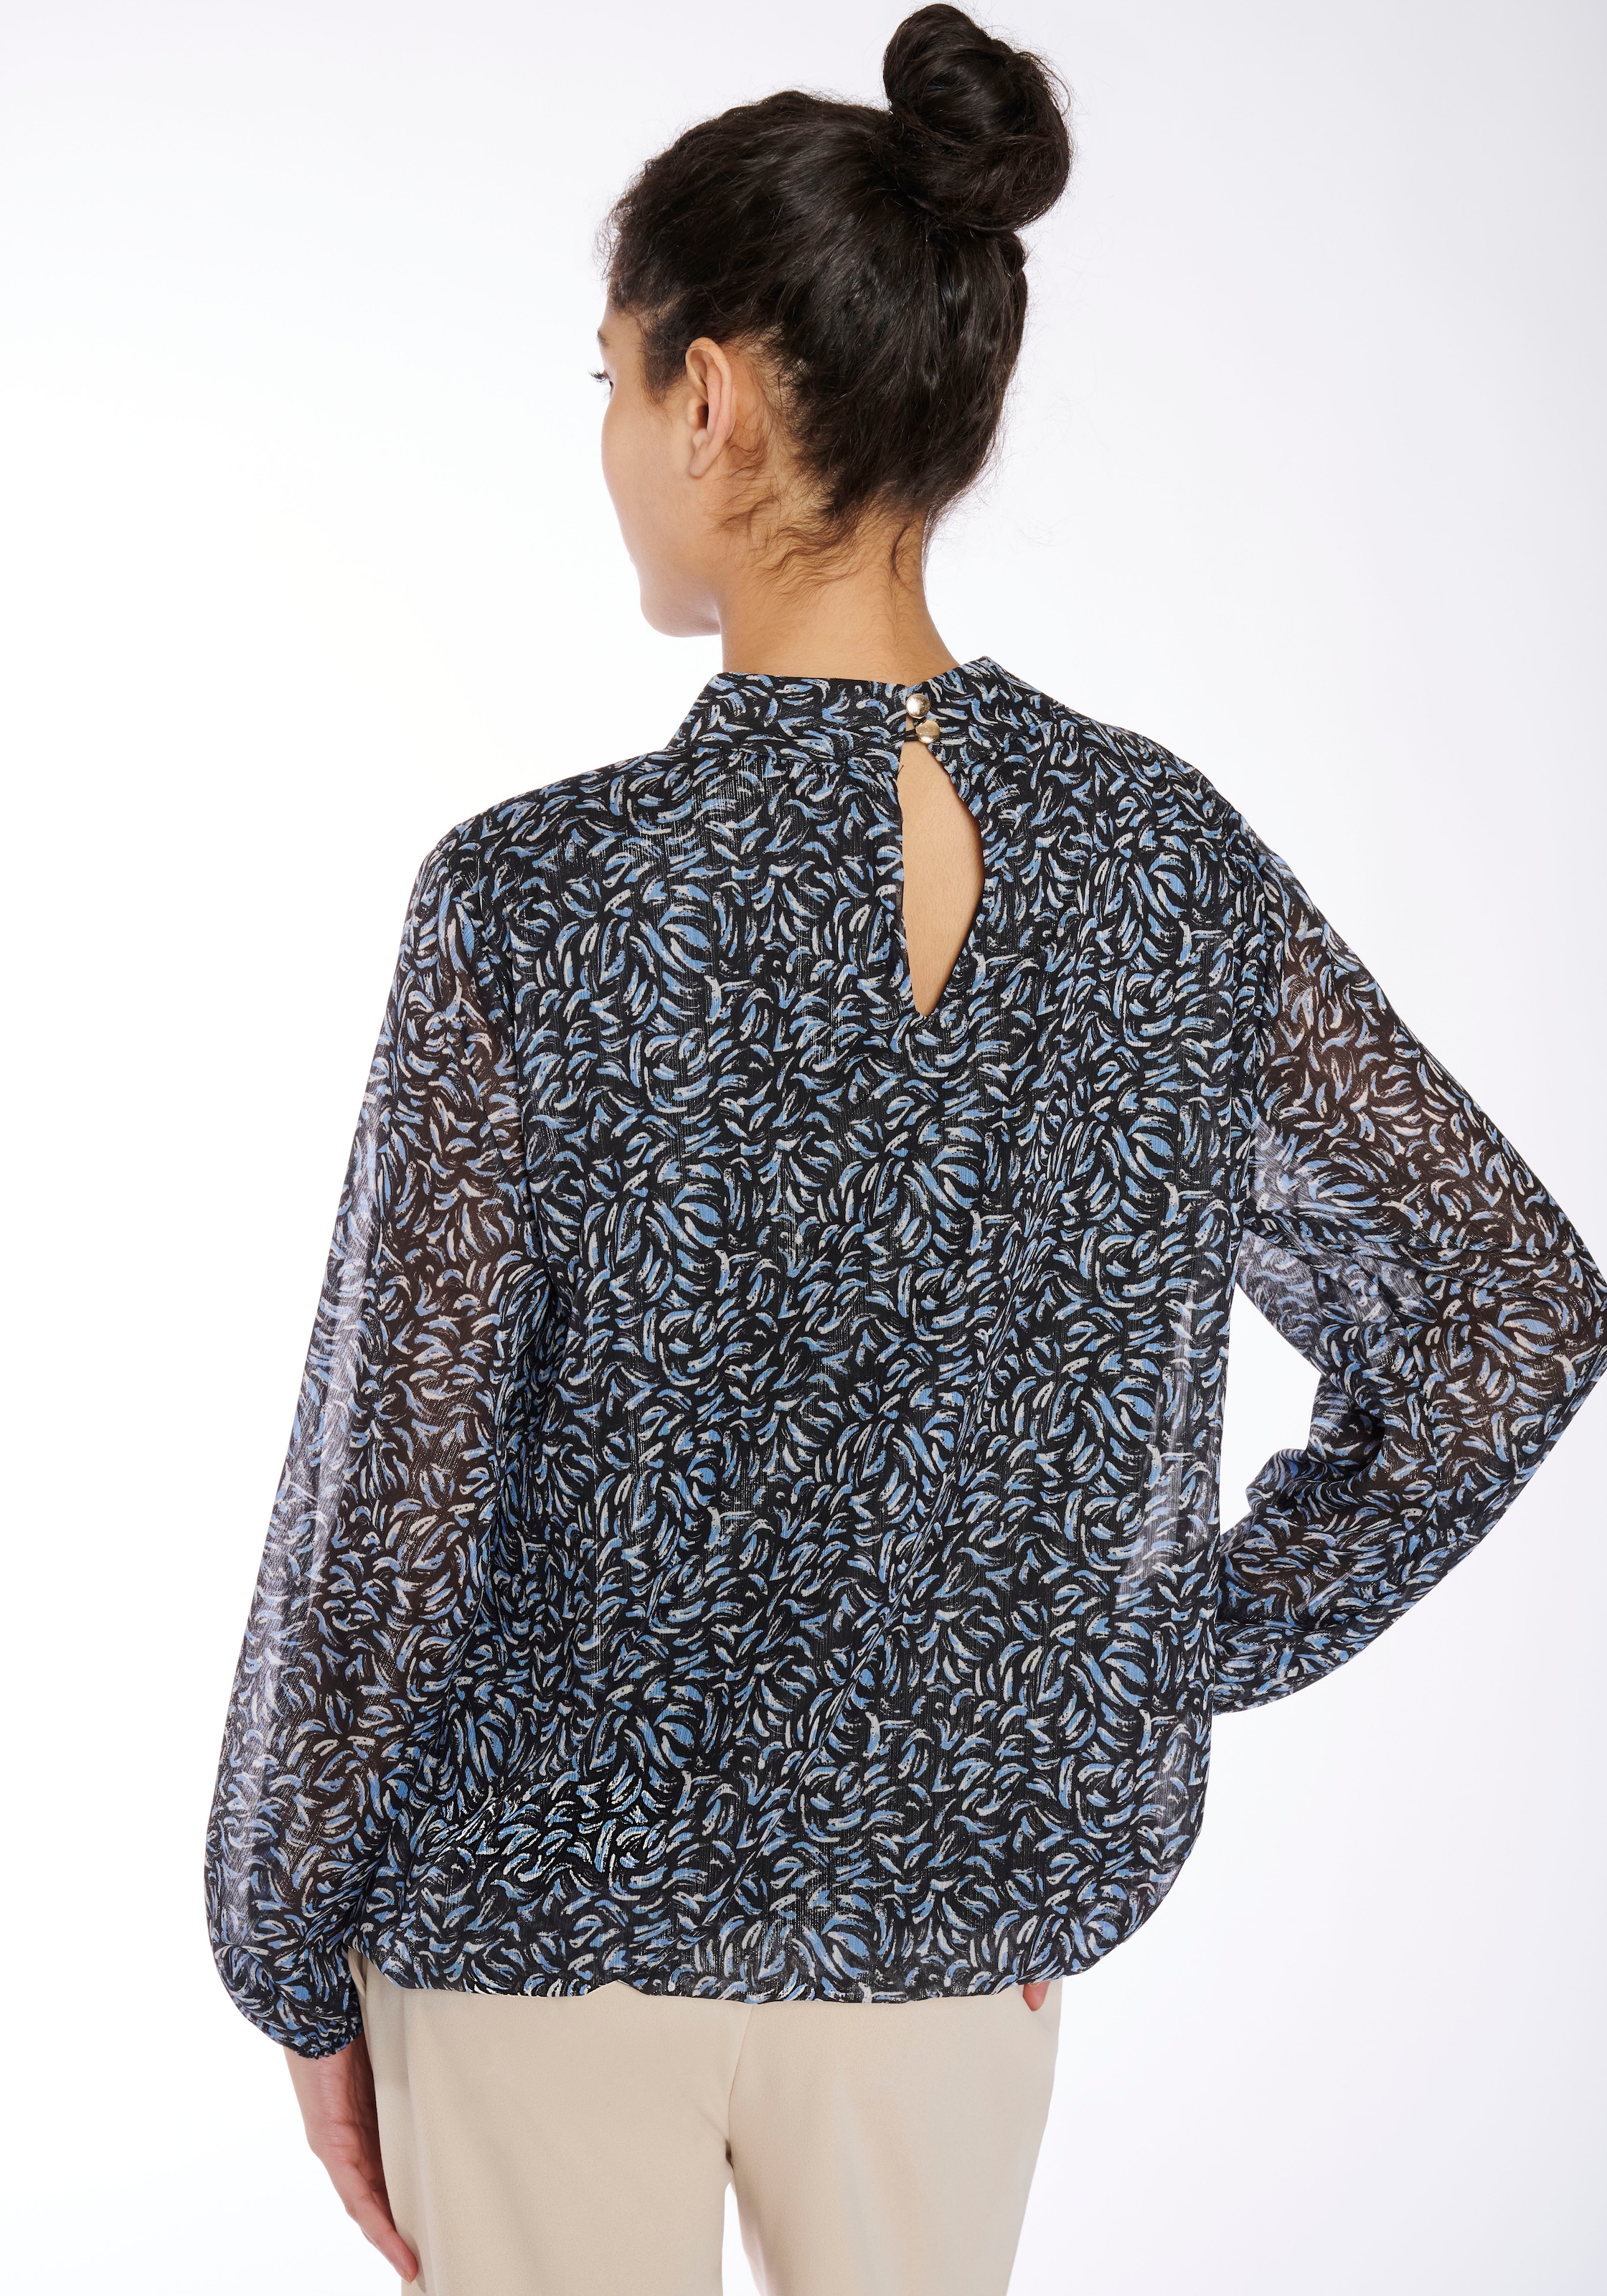 HaILY’S Blusenshirt »LS P TP Re44ni Glitter«, mit Allover Muster